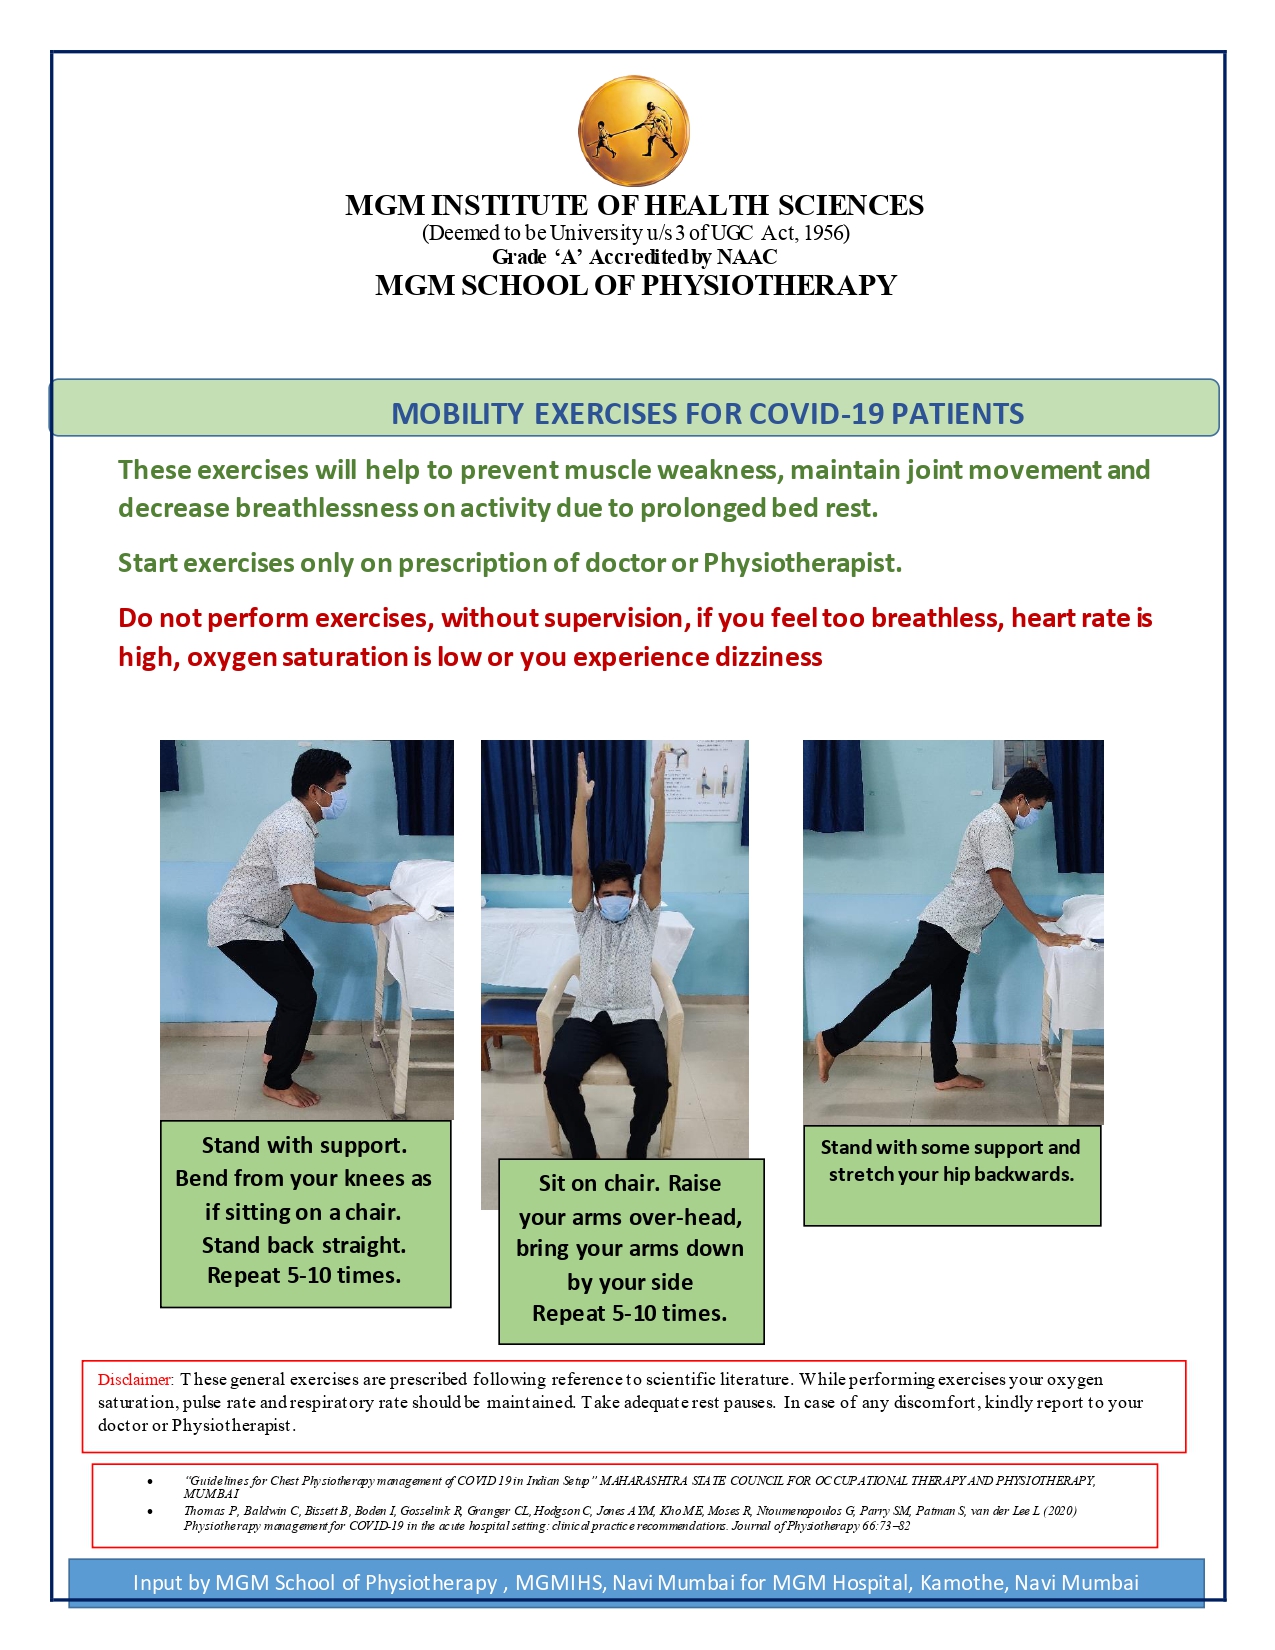 Mobility Exercise for COVID 19 Patients (English)